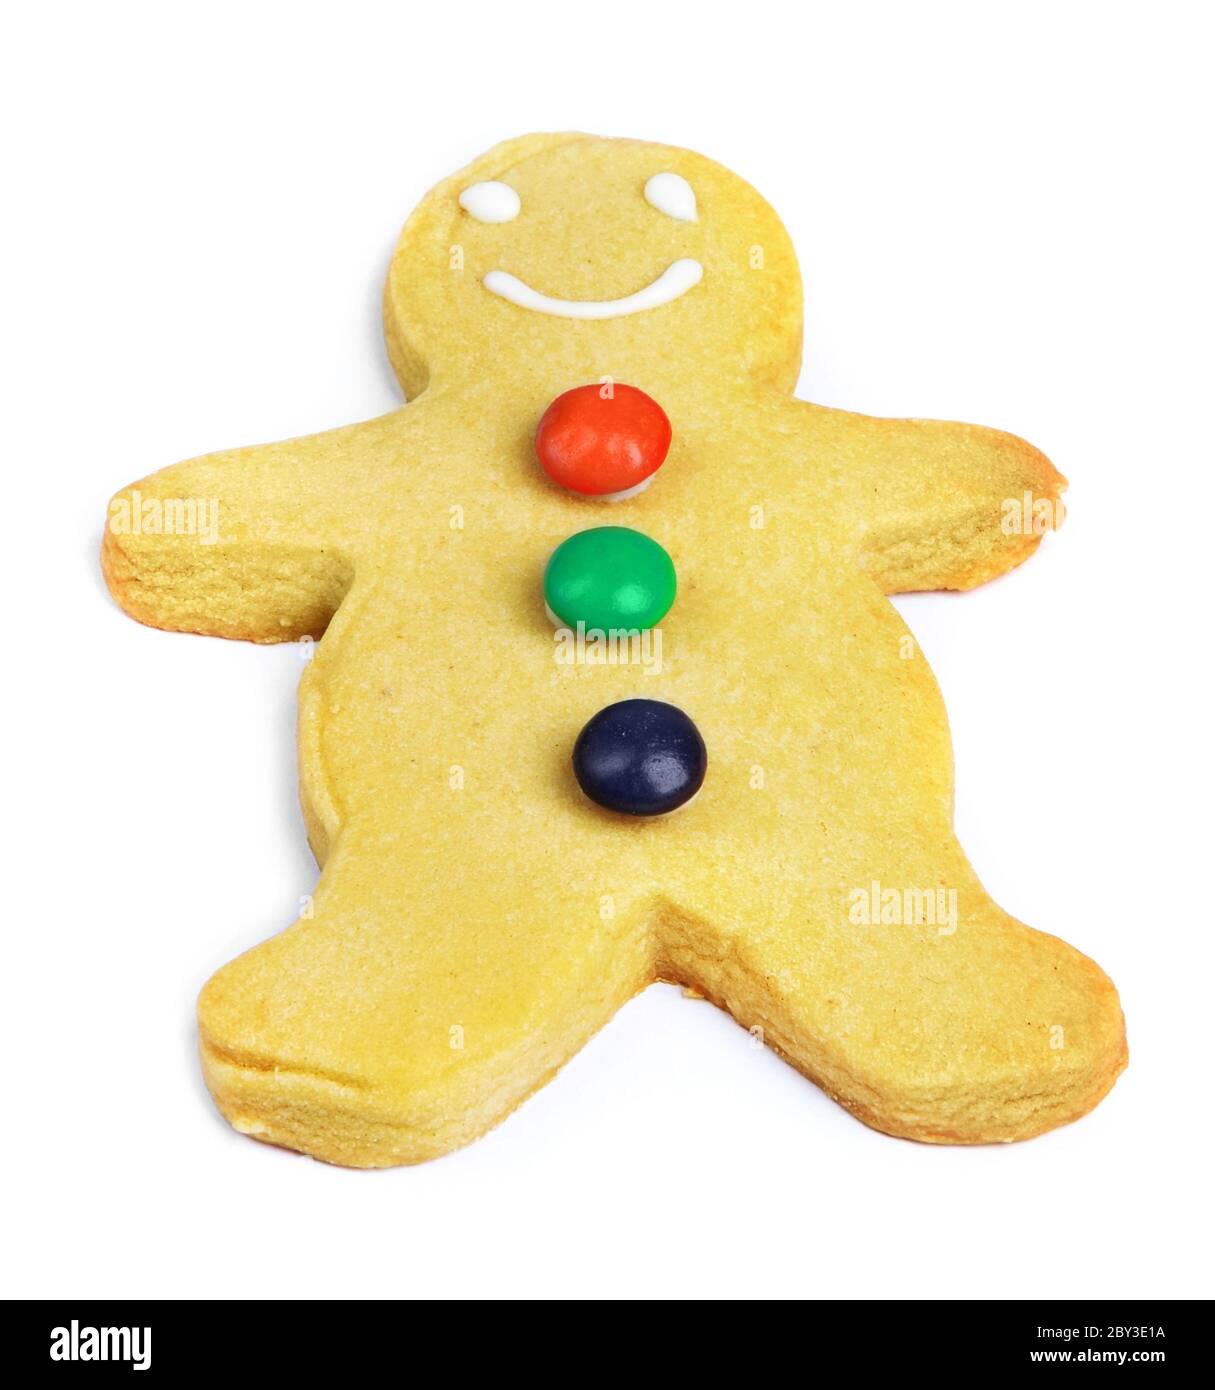 Gingerbread man cookie isolated Stock Photo